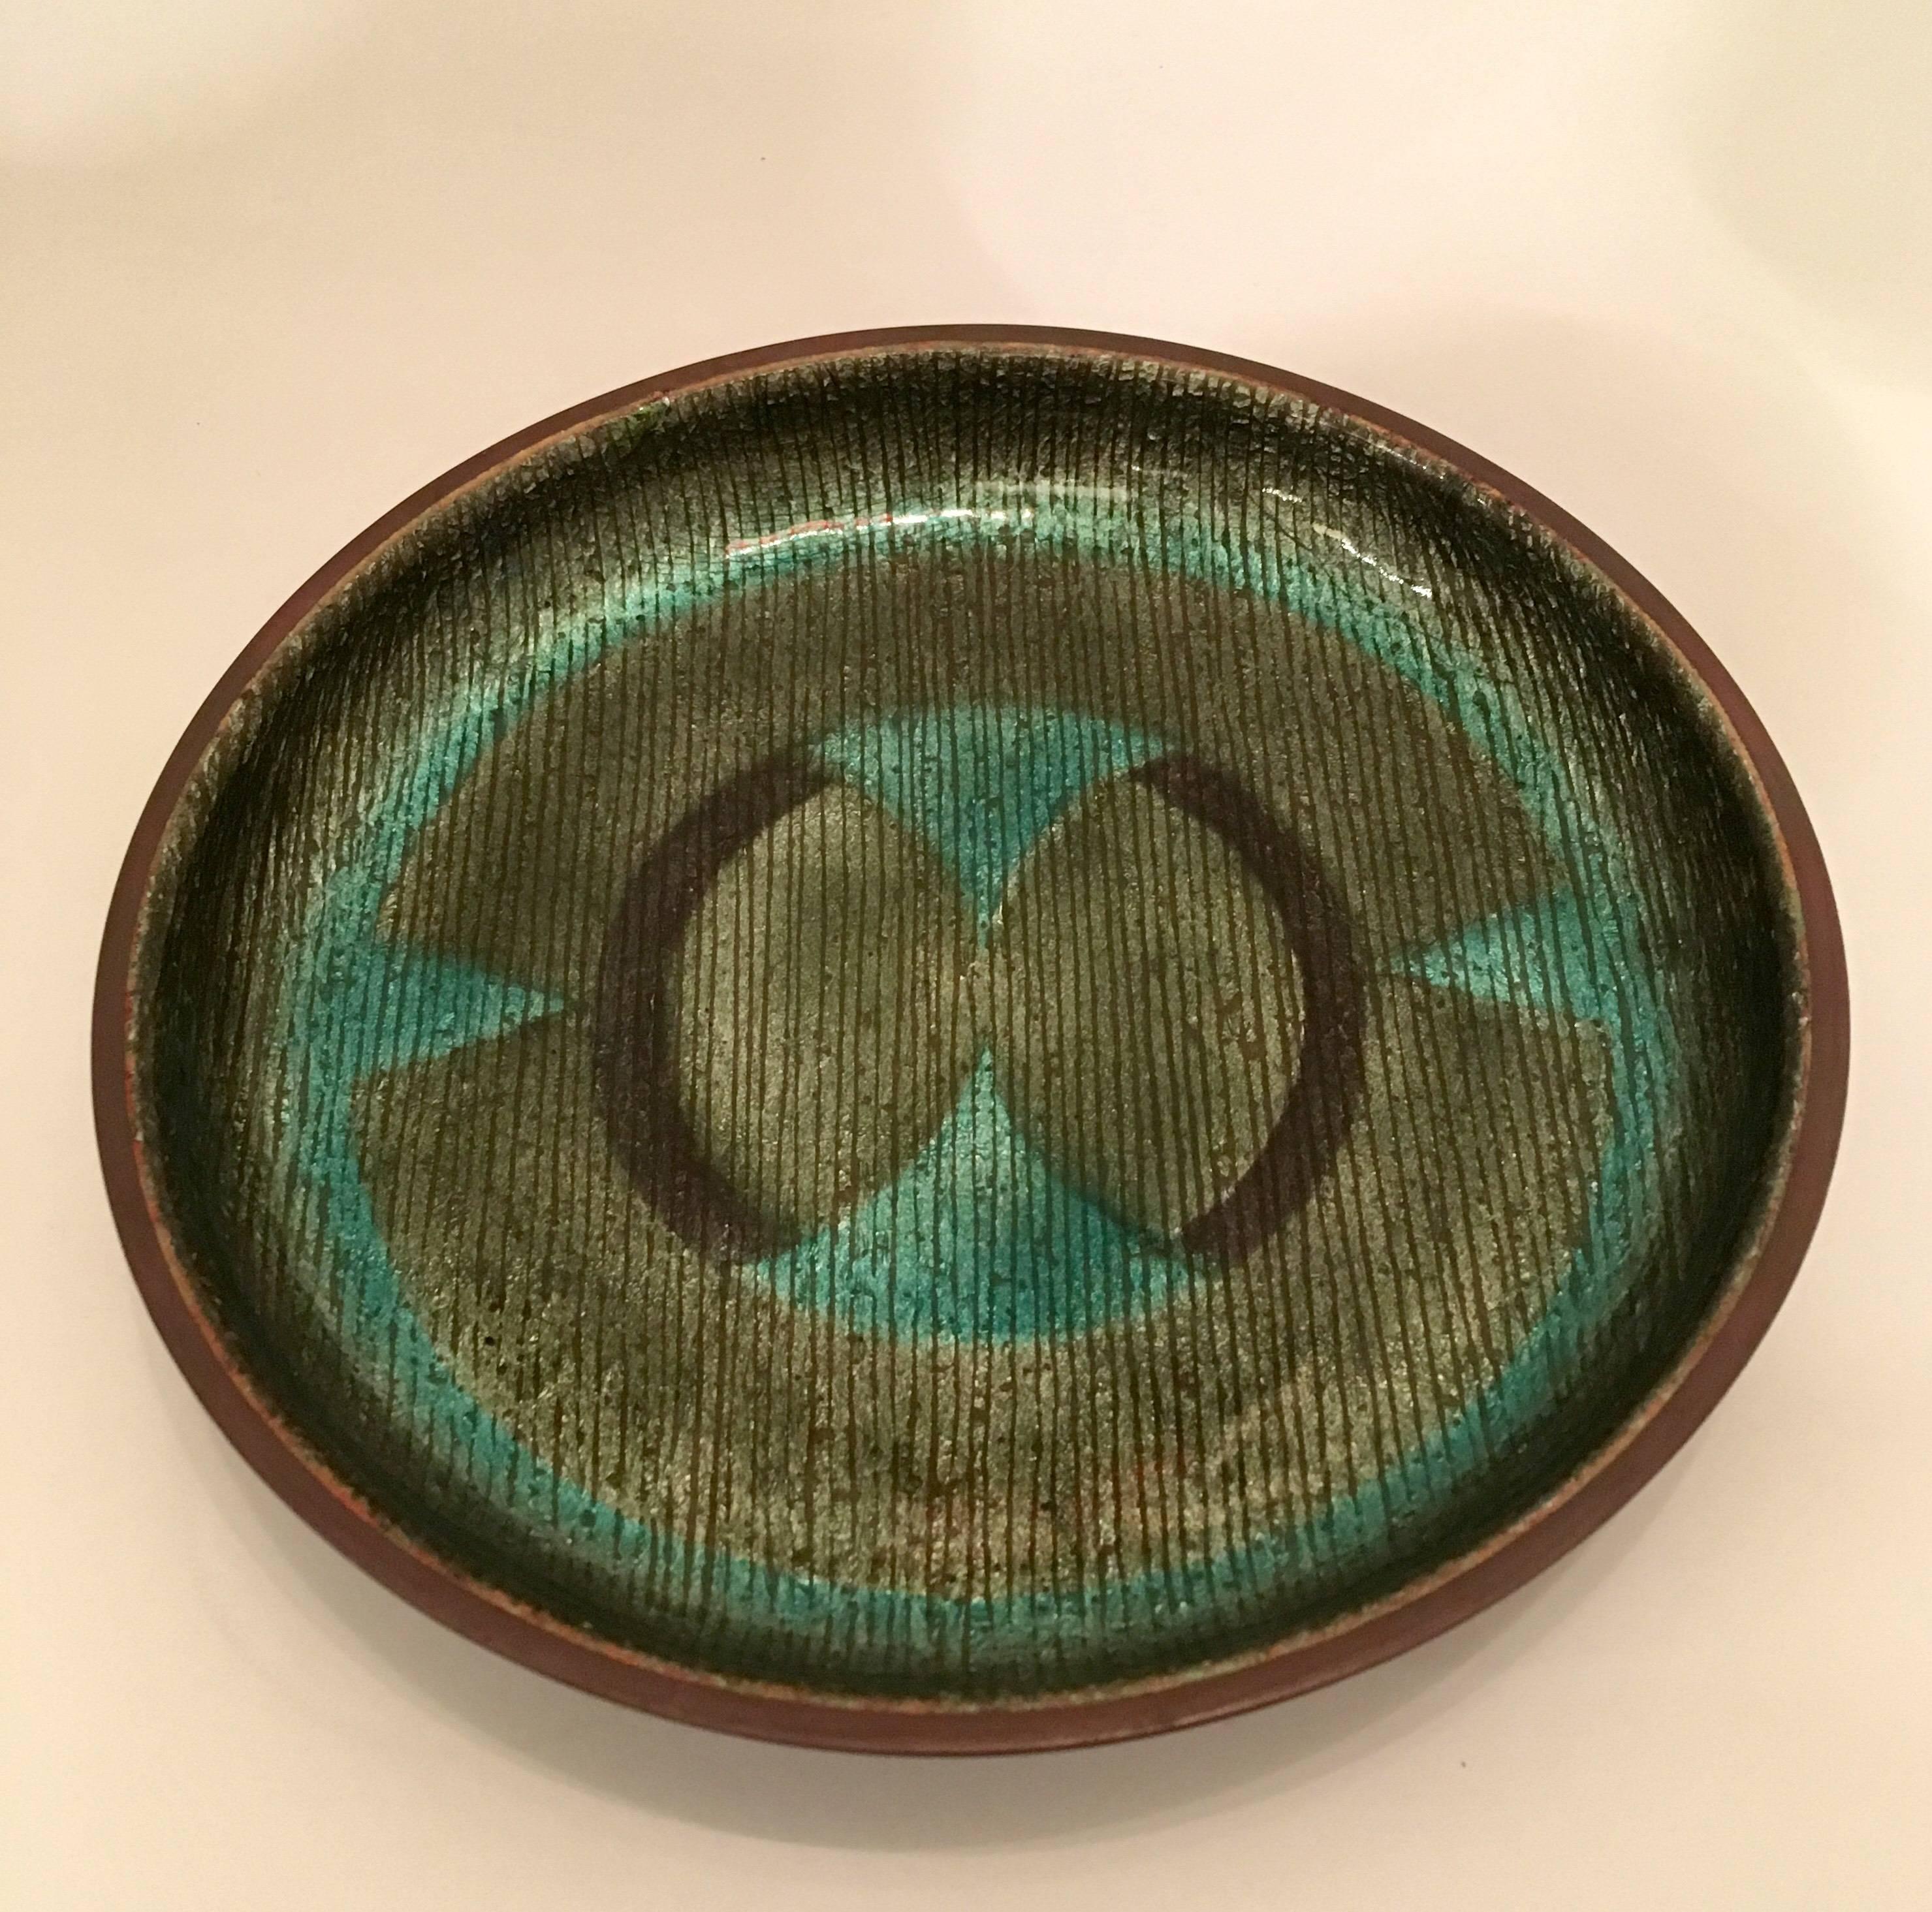 A 1960s handmade enamel over copper with an abstract design in colors of black, and olive and teal green. Signed.
